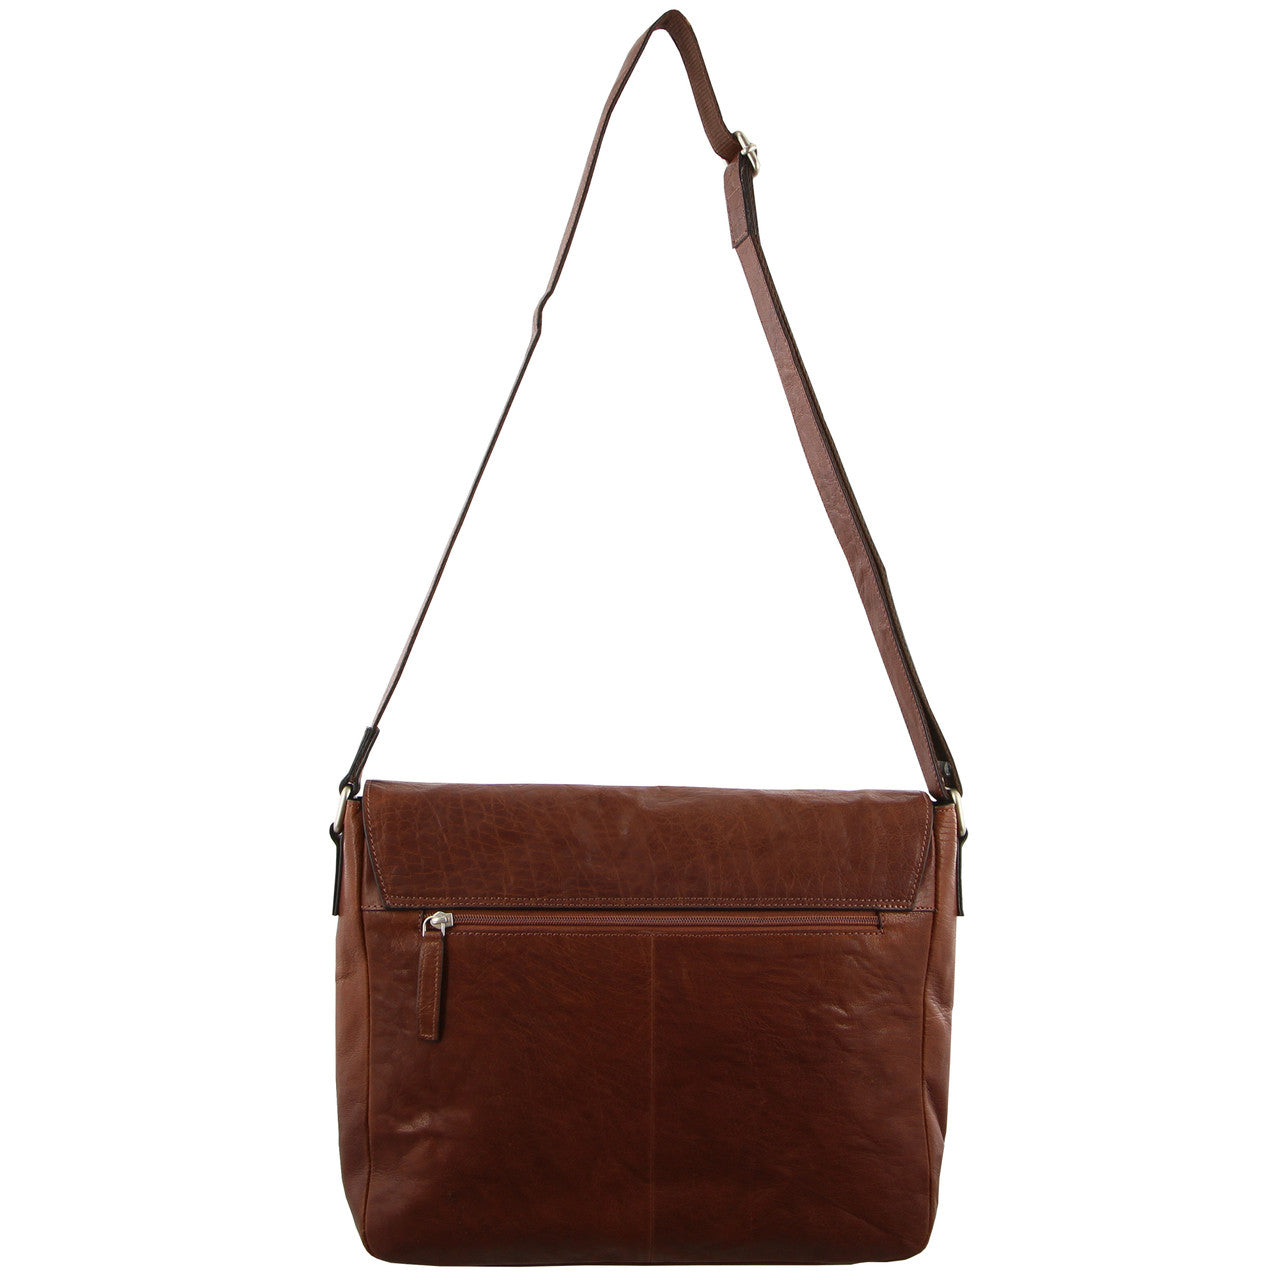 Pierre Cardin Rustic Leather Computer/Messenger Bag with flap closure-3